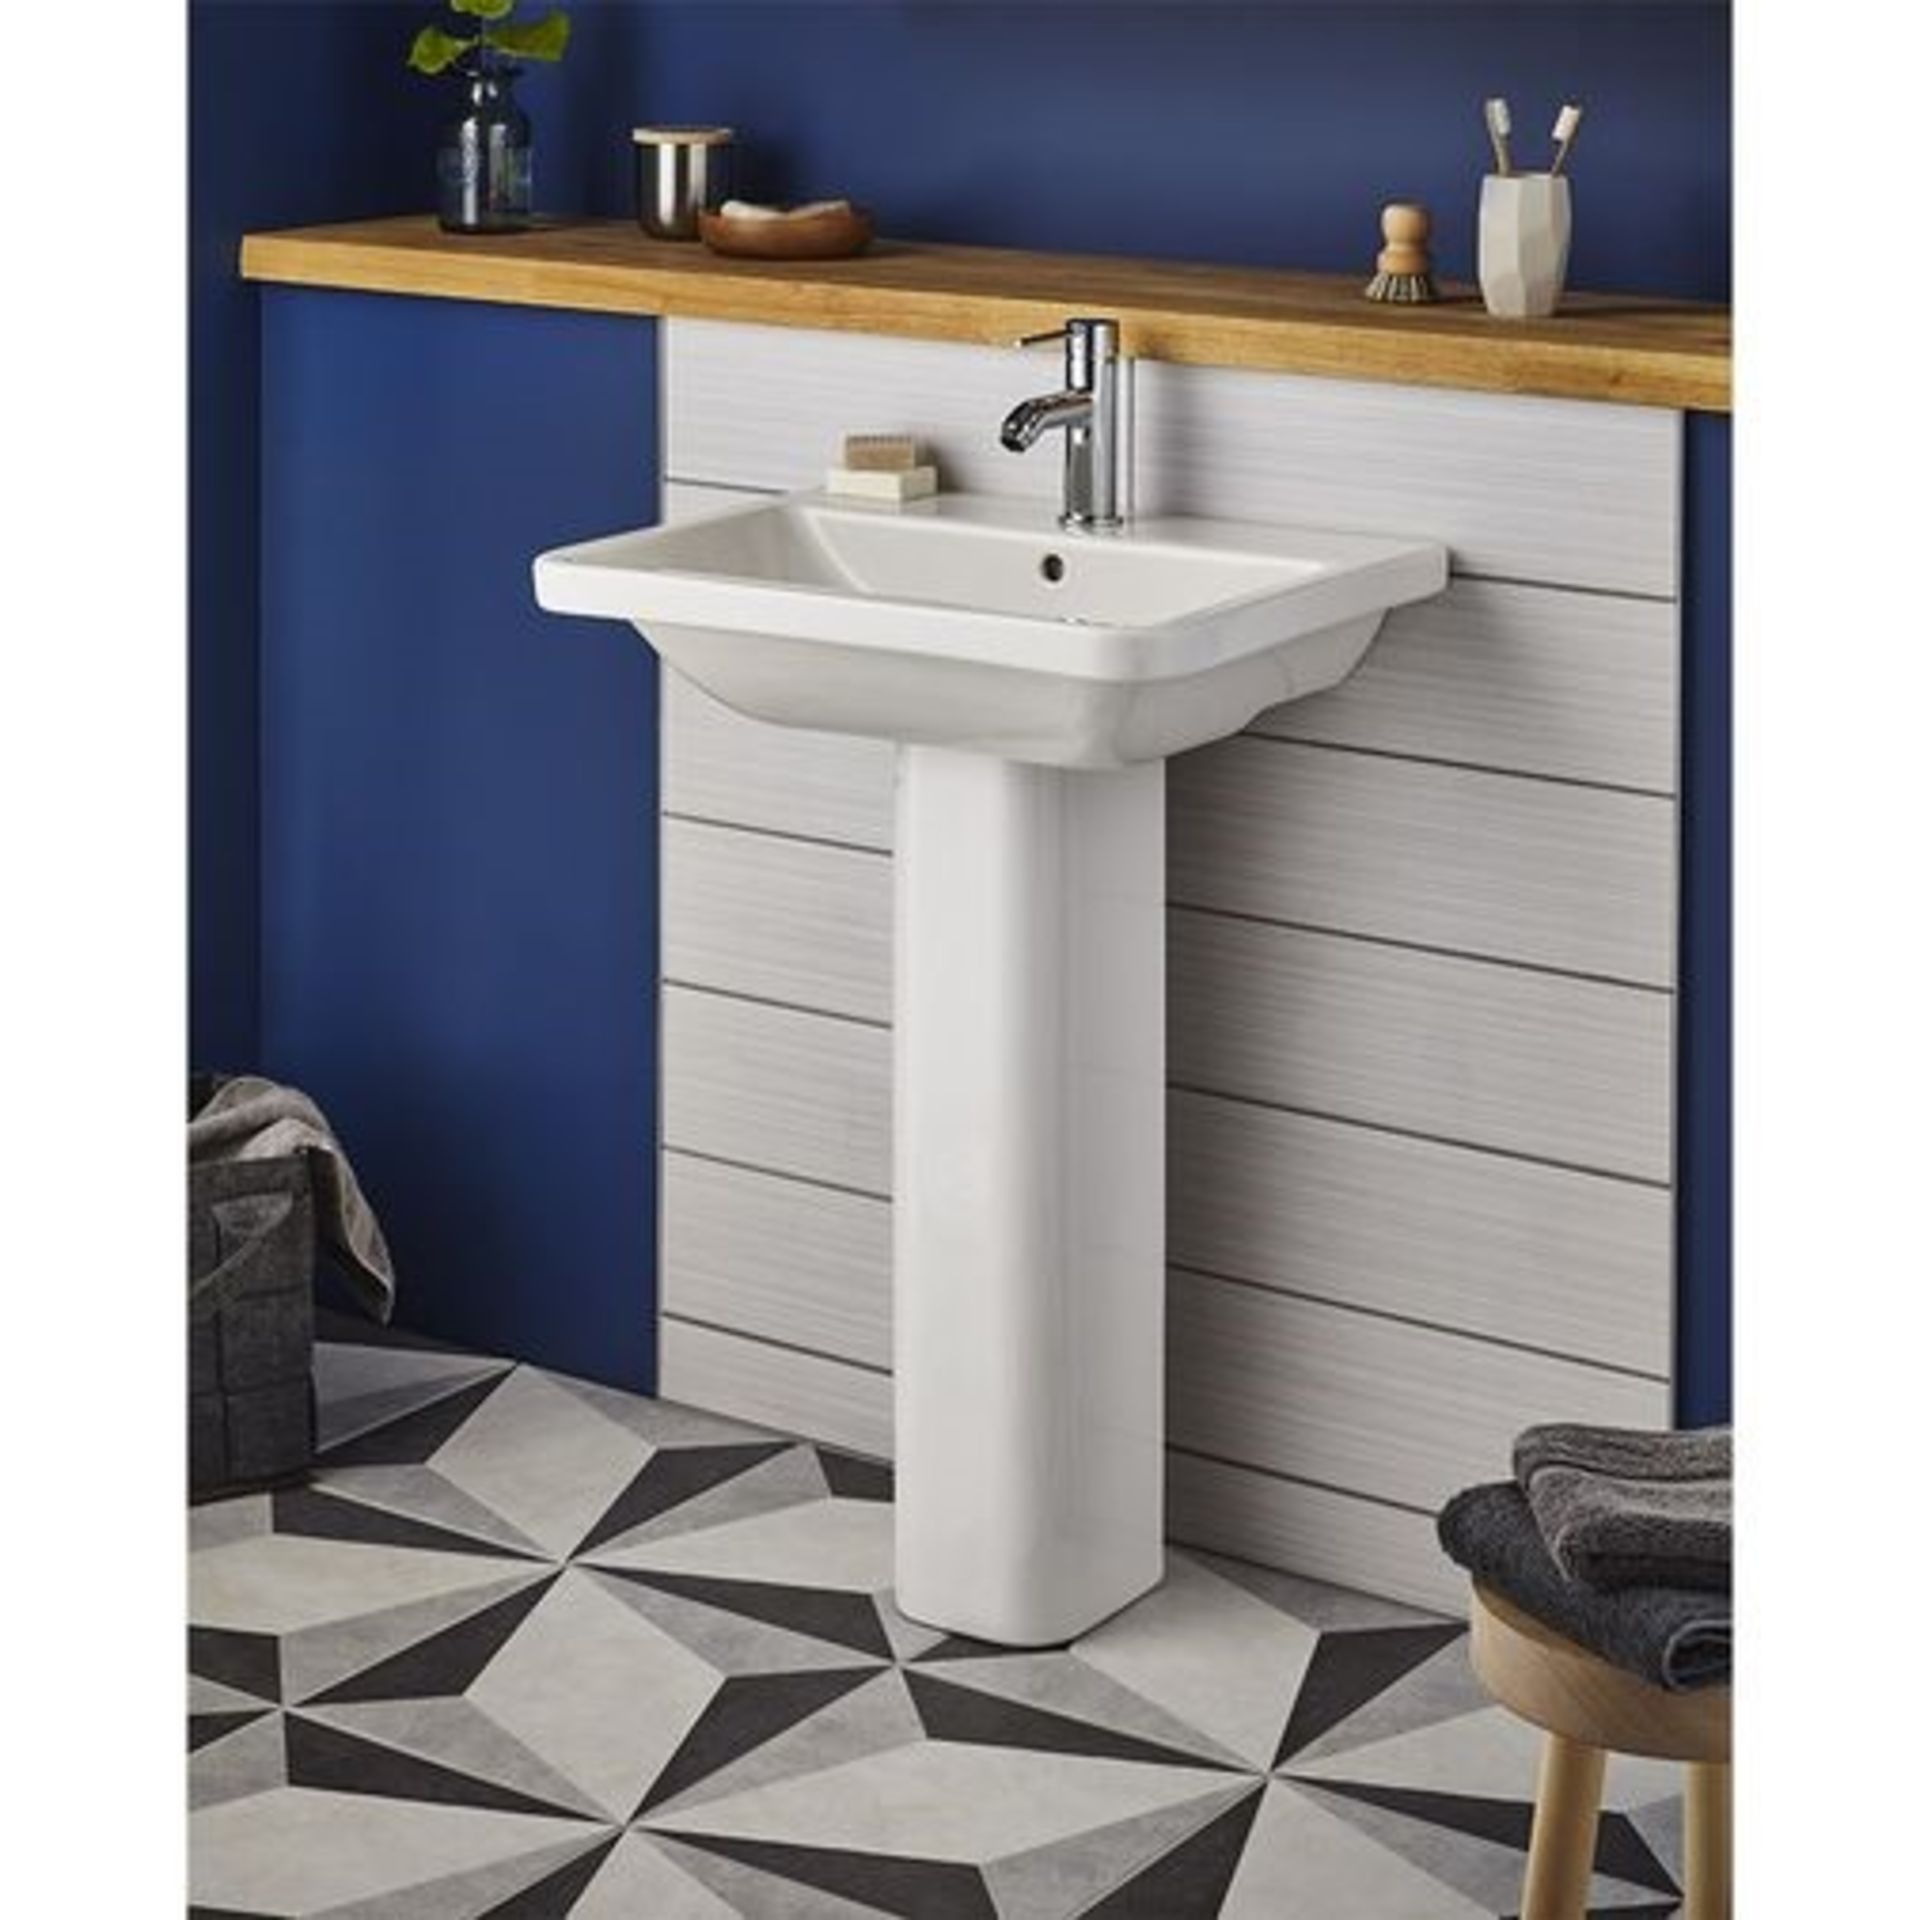 EURO 500mm DESIGNER BASIN WITH PEDESTAL. CAN BE WALL OR PEDESTAL MOUNTED. RRP £395. BRAND NEW, BOXED